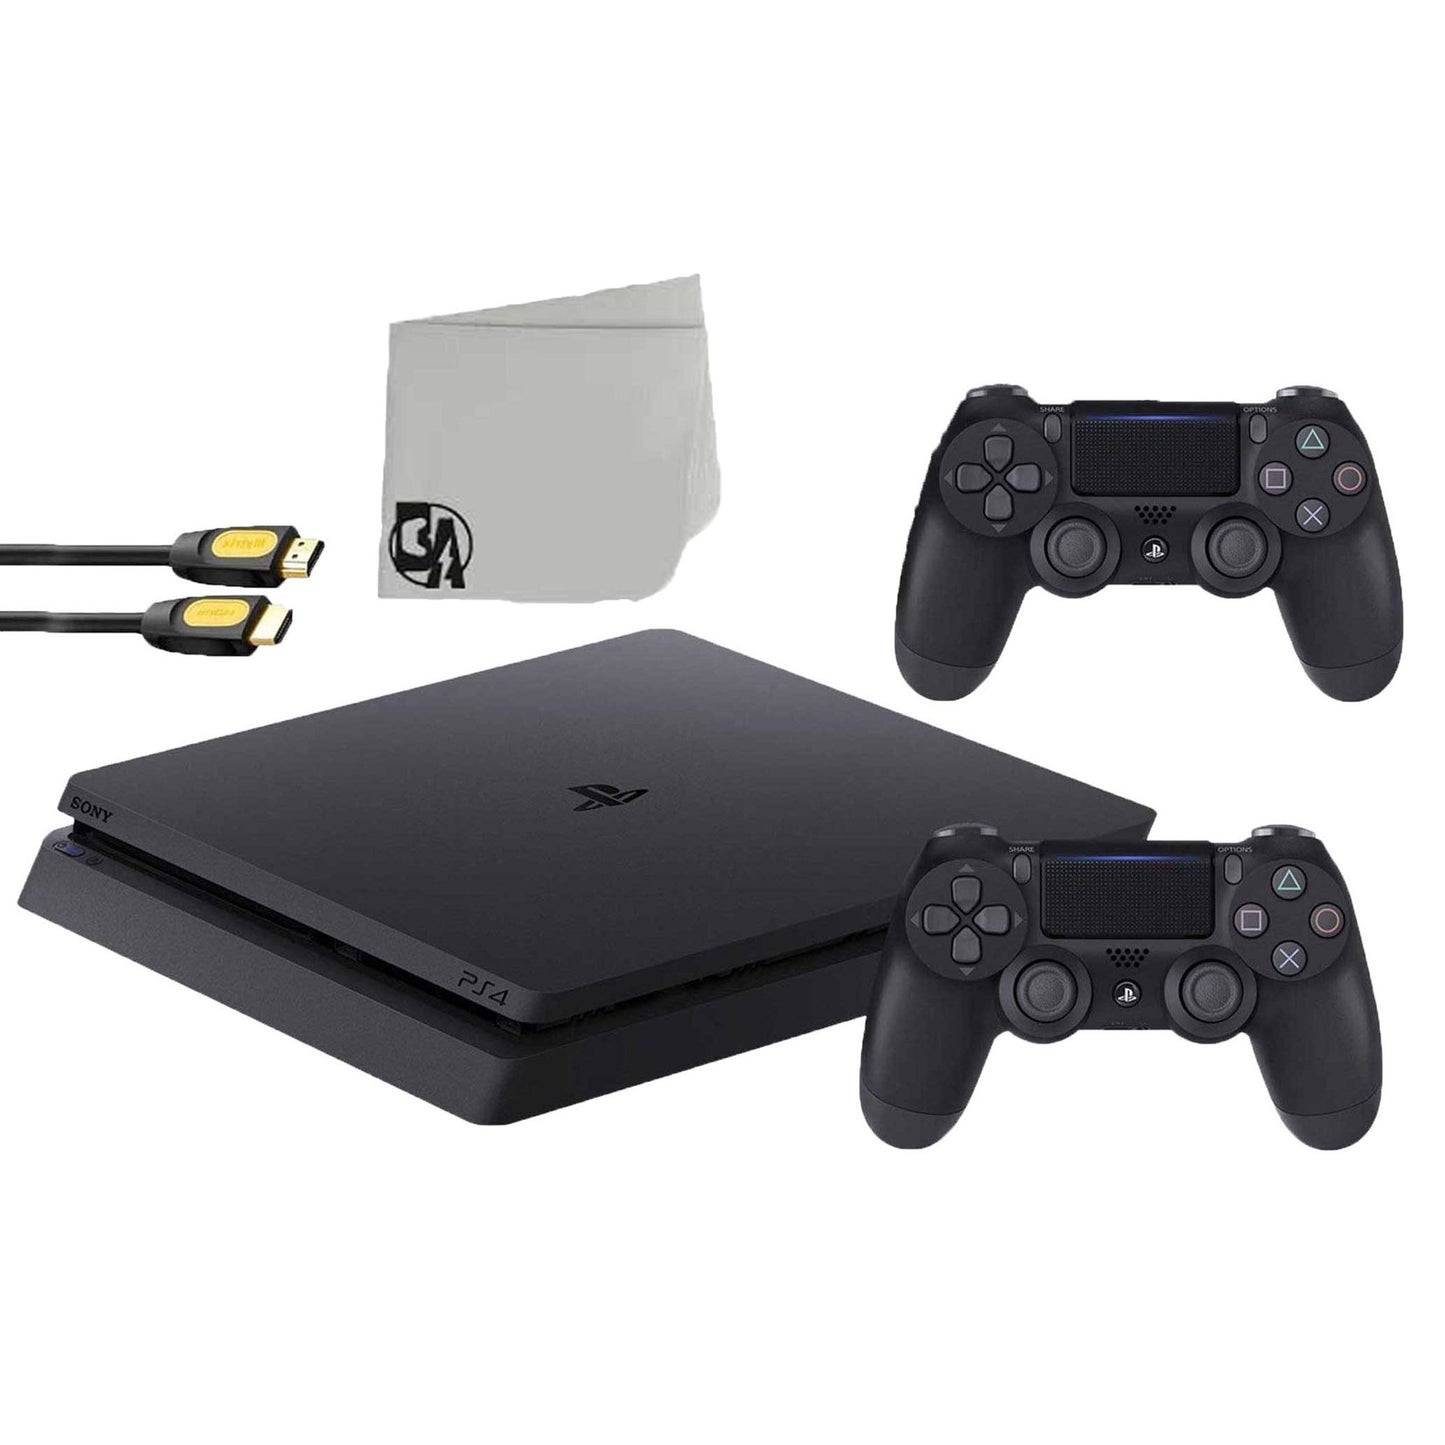 Sony 2215B PlayStation 4 Slim 1TB Gaming Console Black 2 Controller Included BOLT AXTION Bundle Used